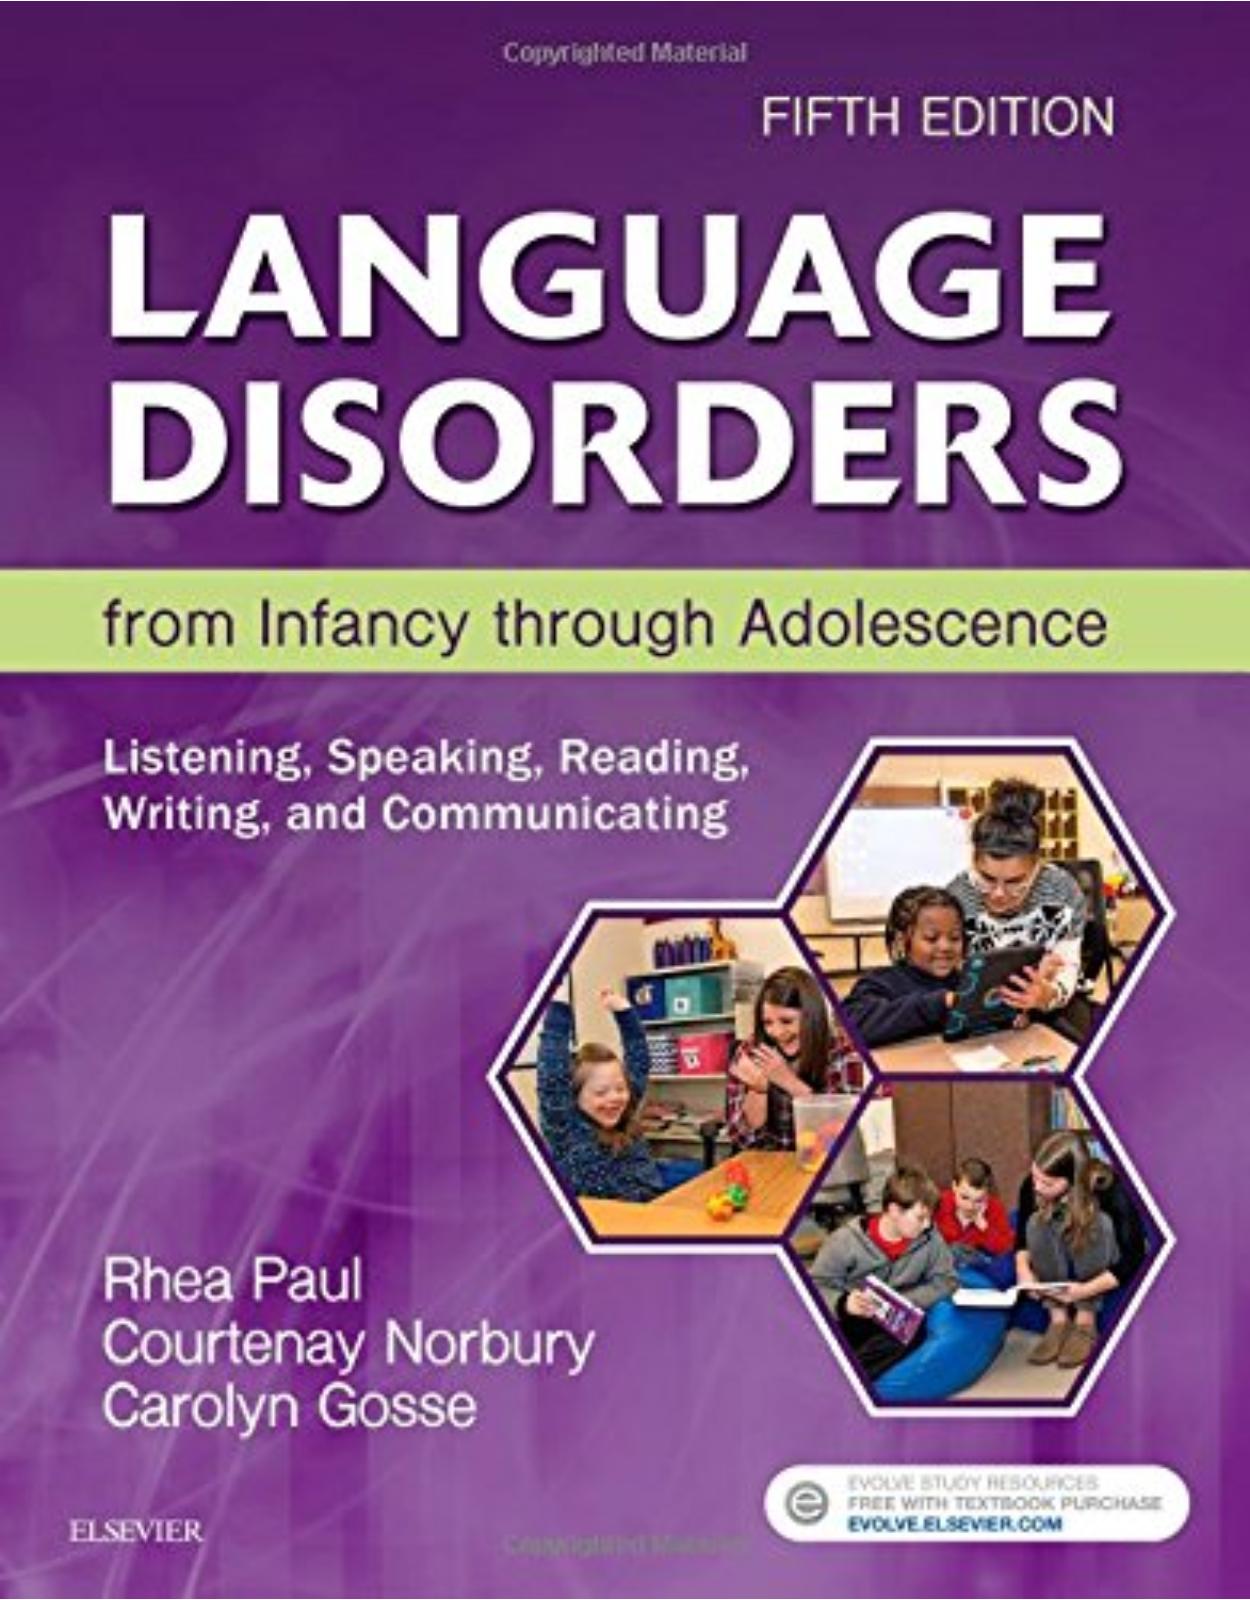 Language Disorders from Infancy through Adolescence: Listening, Speaking, Reading, Writing, and Communicating, 5e